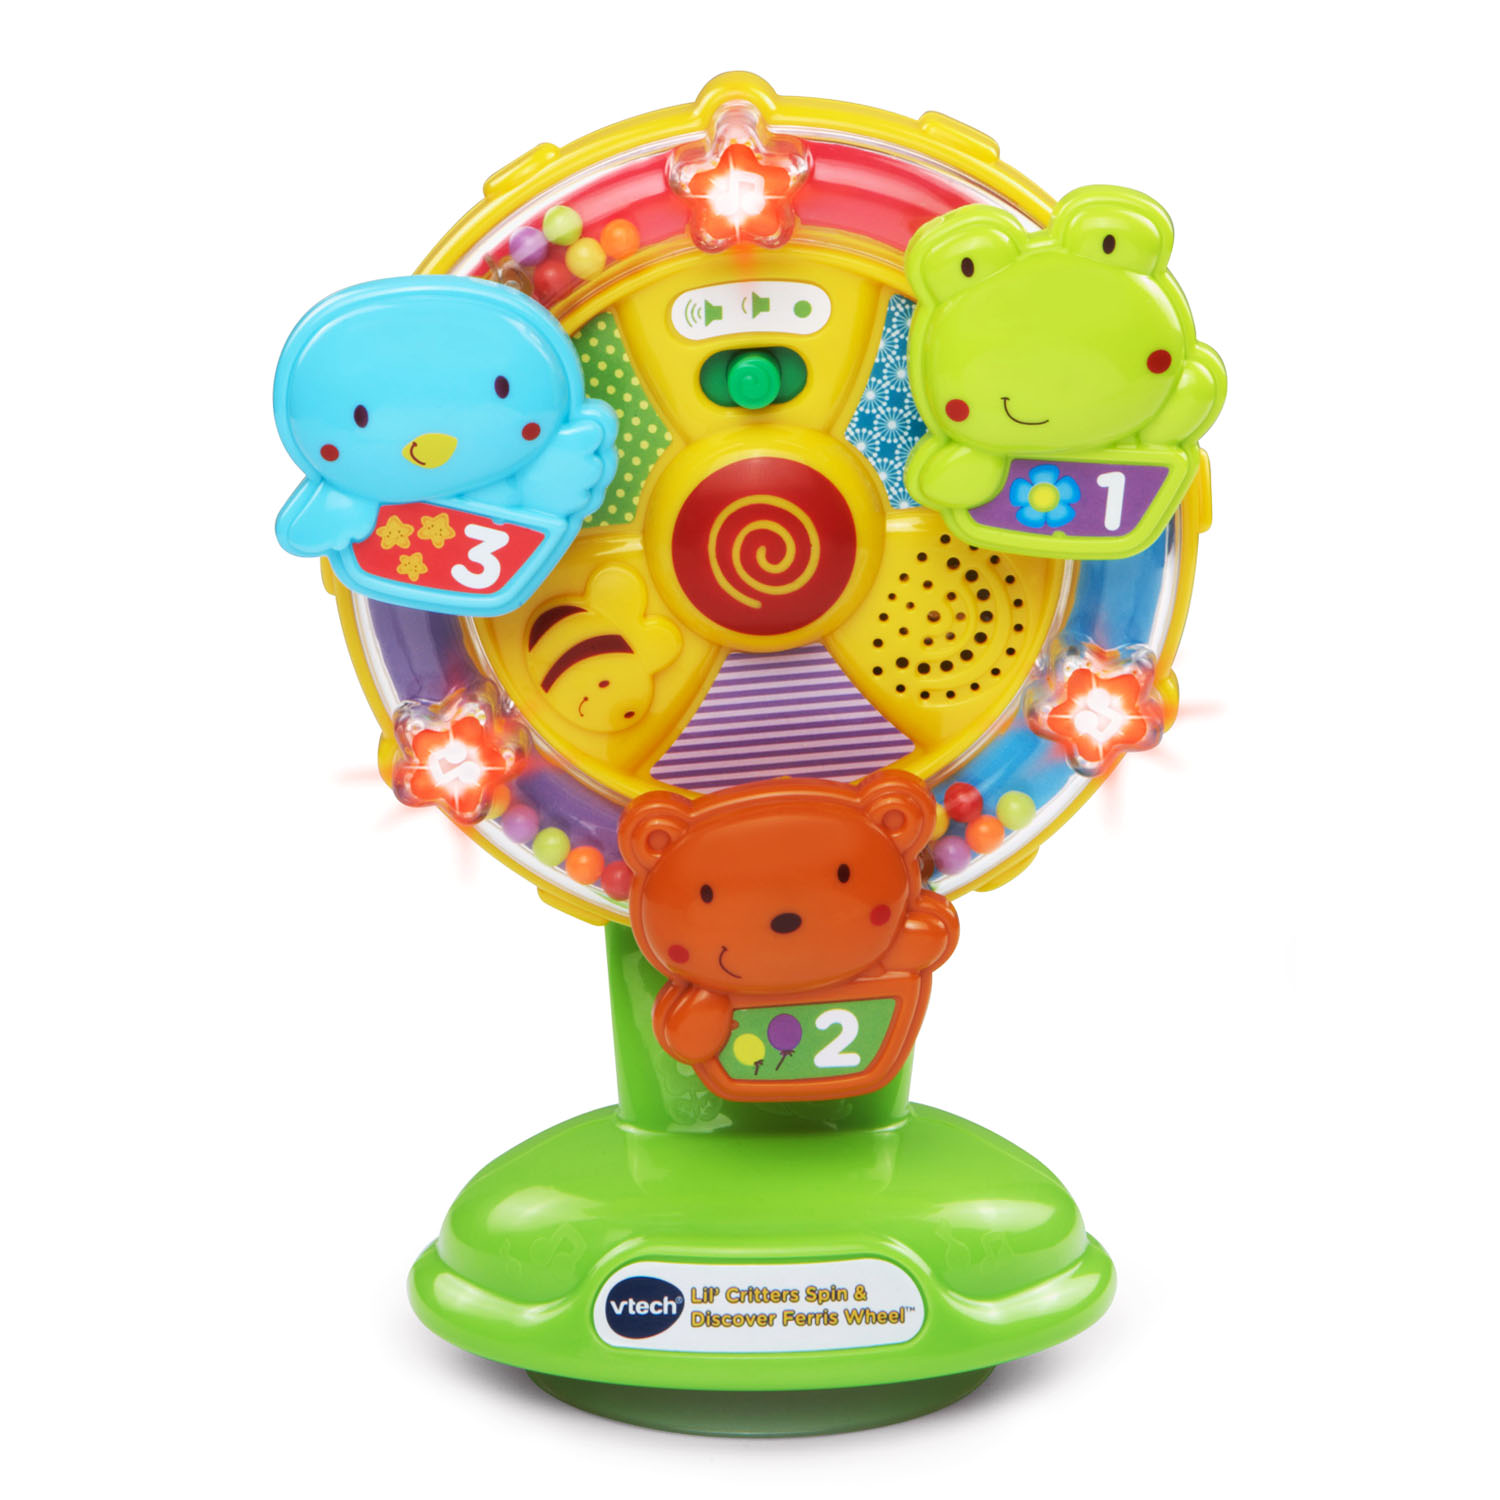 VTech Lil' Critters Spin and Discover Ferris Wheel, Toddler Learning Toy - image 1 of 13